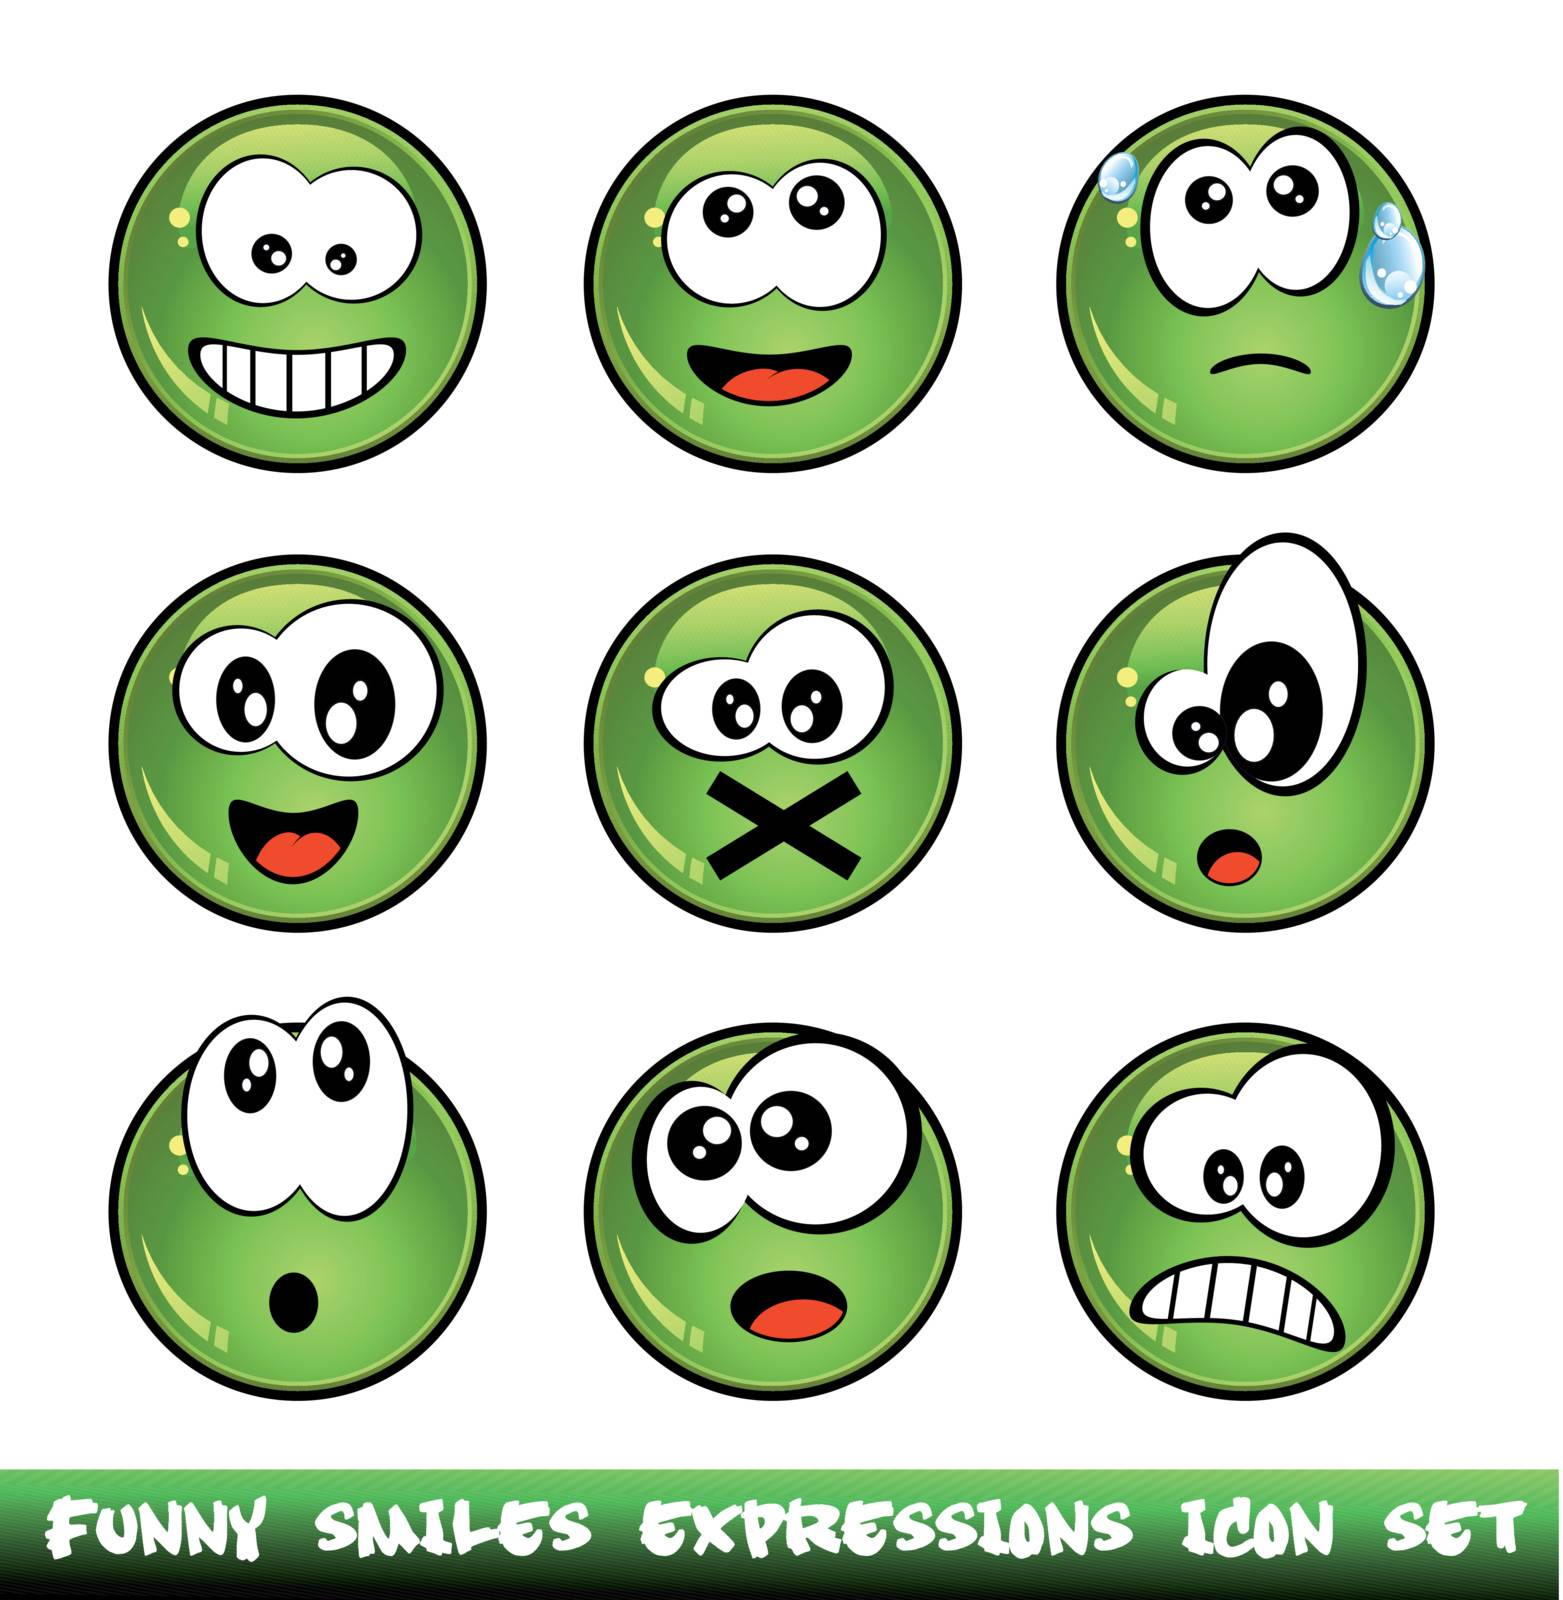 Funny Smiles Collection by DavidArts